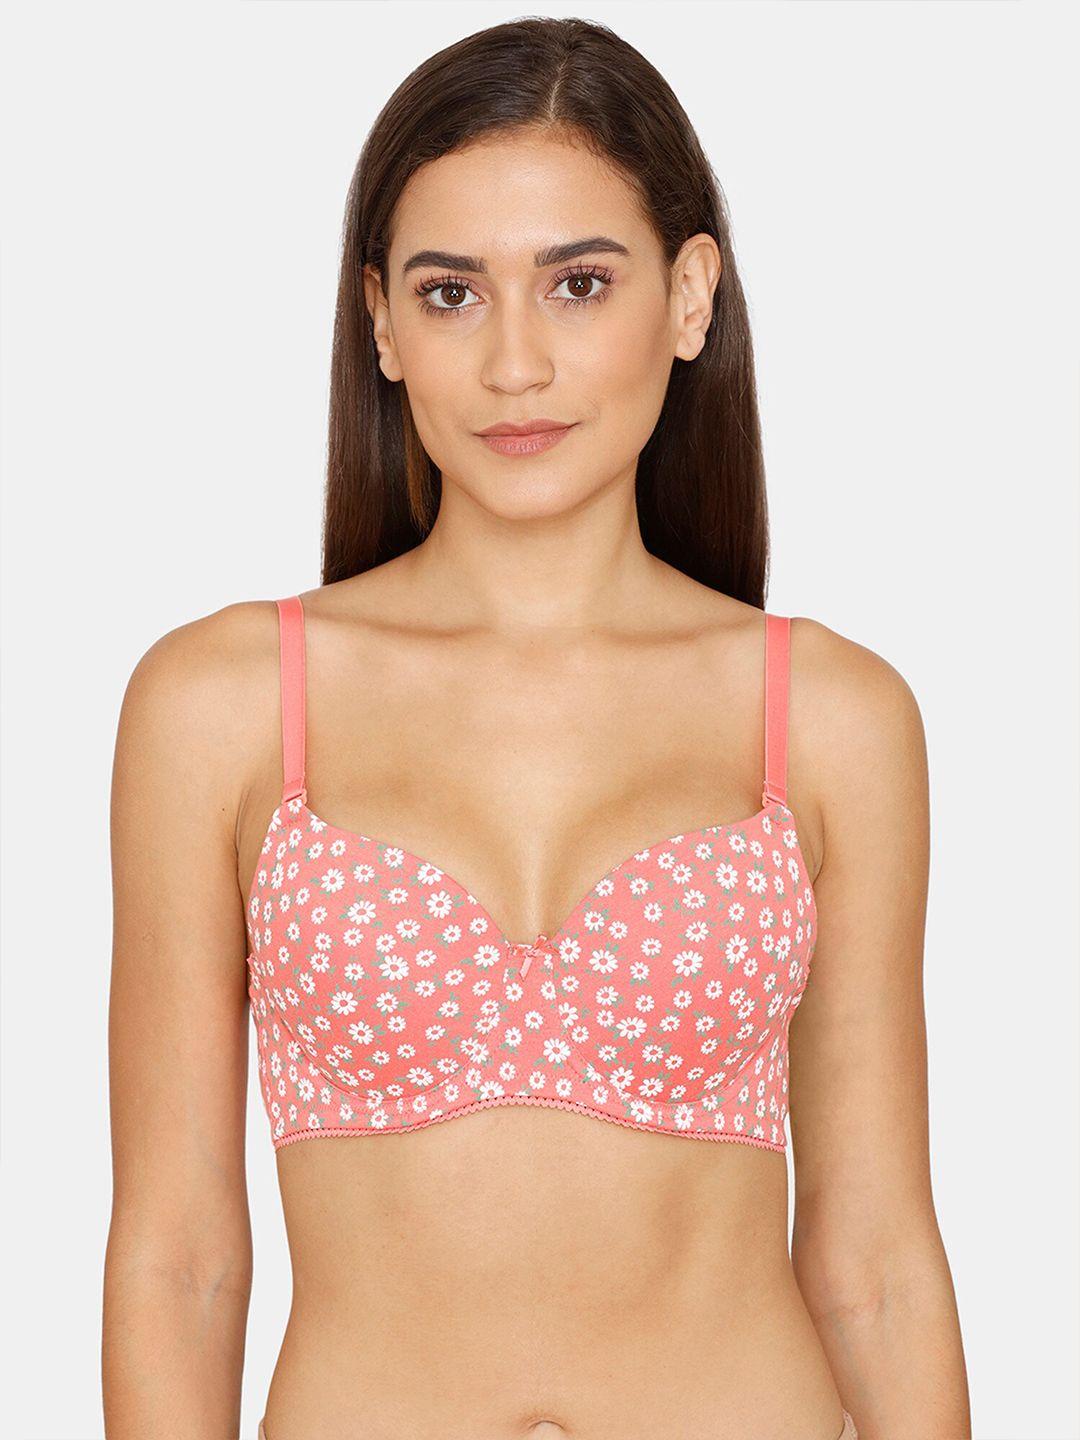 rosaline-by-zivame-pink-&-white-underwired-lightly-padded-floral-bra-ro1164fashornge